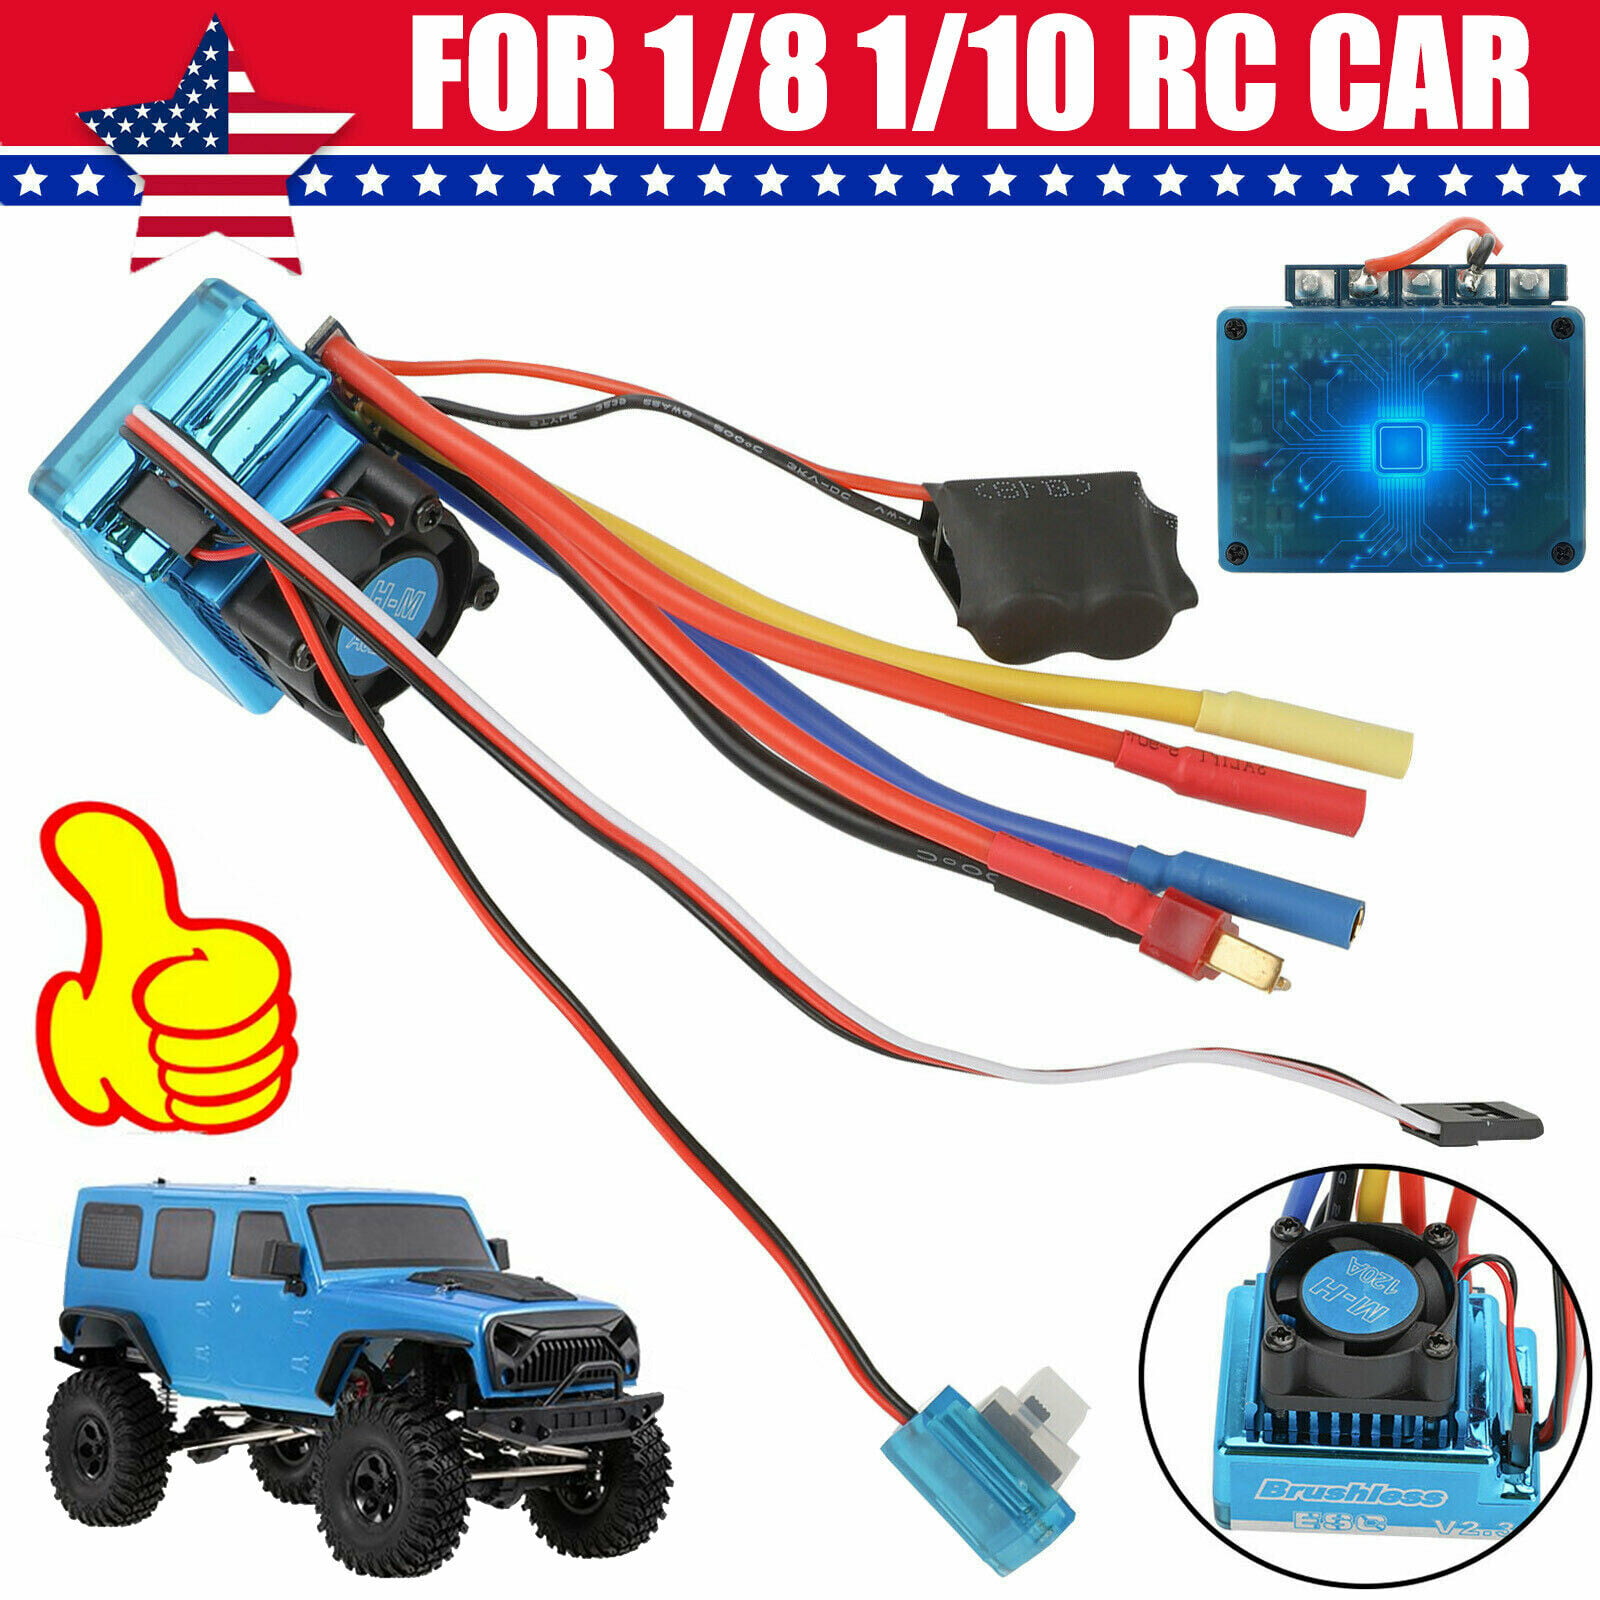 120A Brushless ESC Electric Speed Controller for 1/8 1/10 RC Car Accessories US 